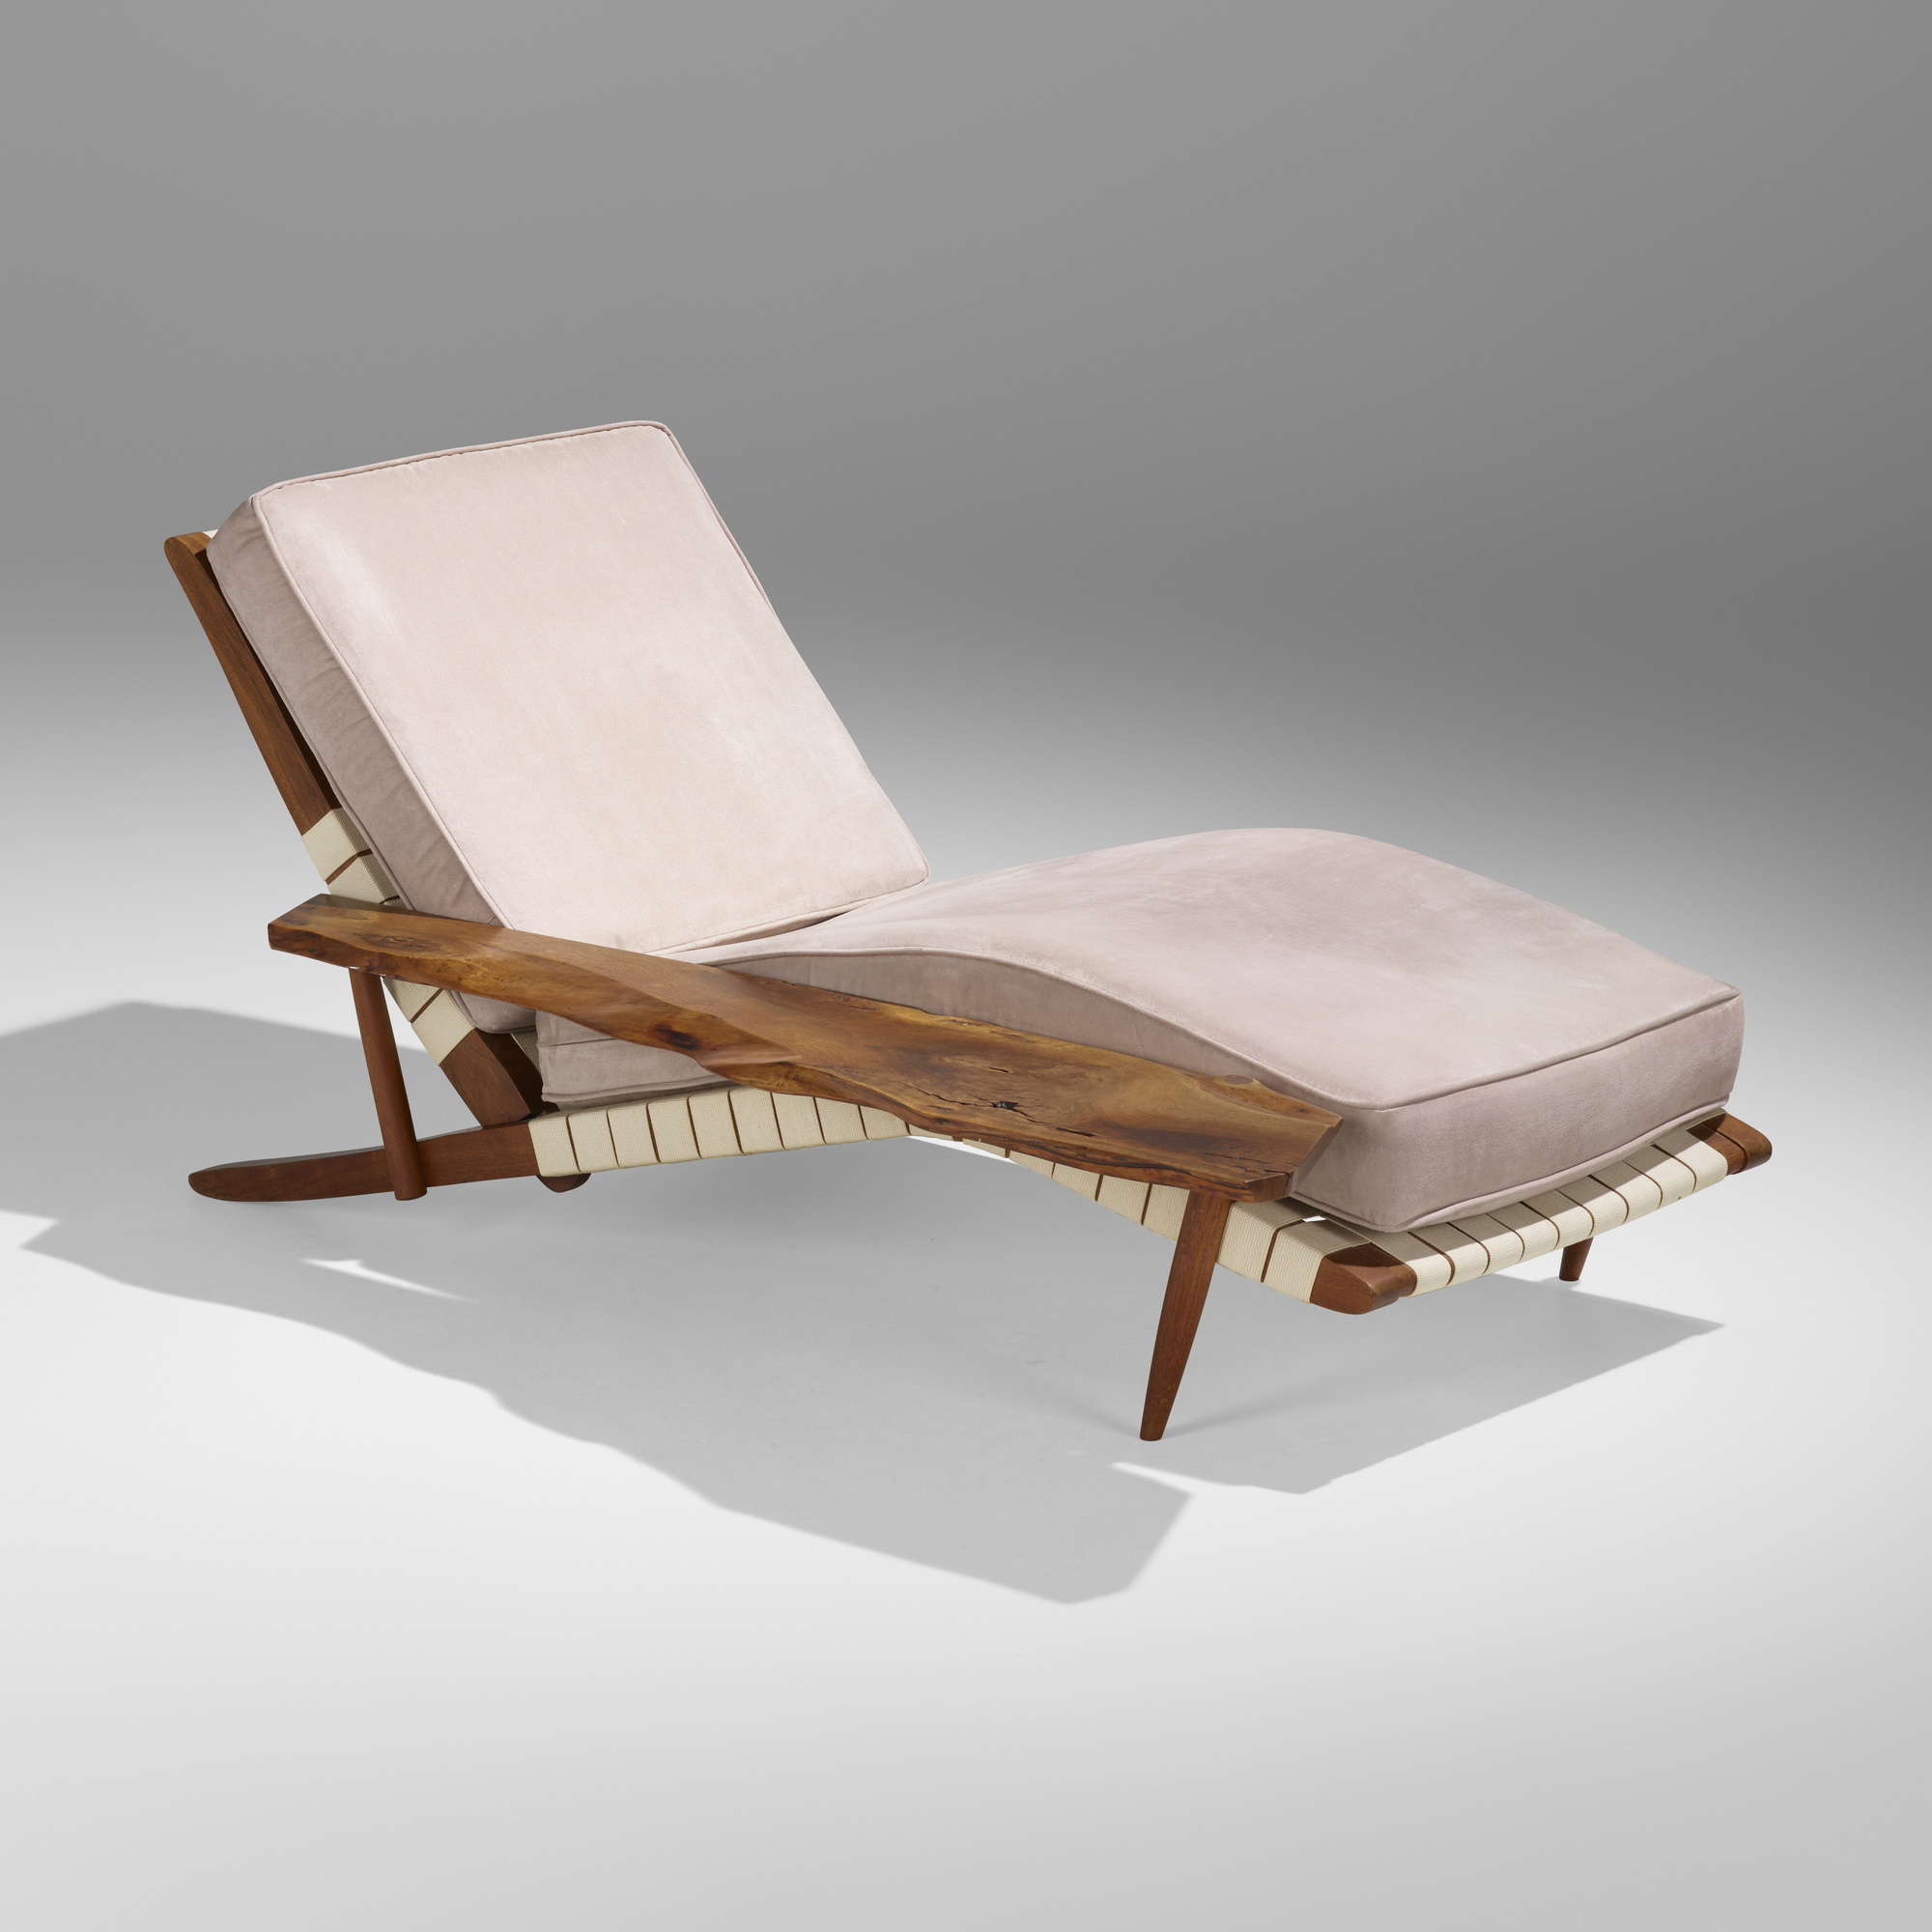 503: NAKASHIMA, Long Chair Right Arm < Modern Design, 12 May 2023 < Auctions | Auctions